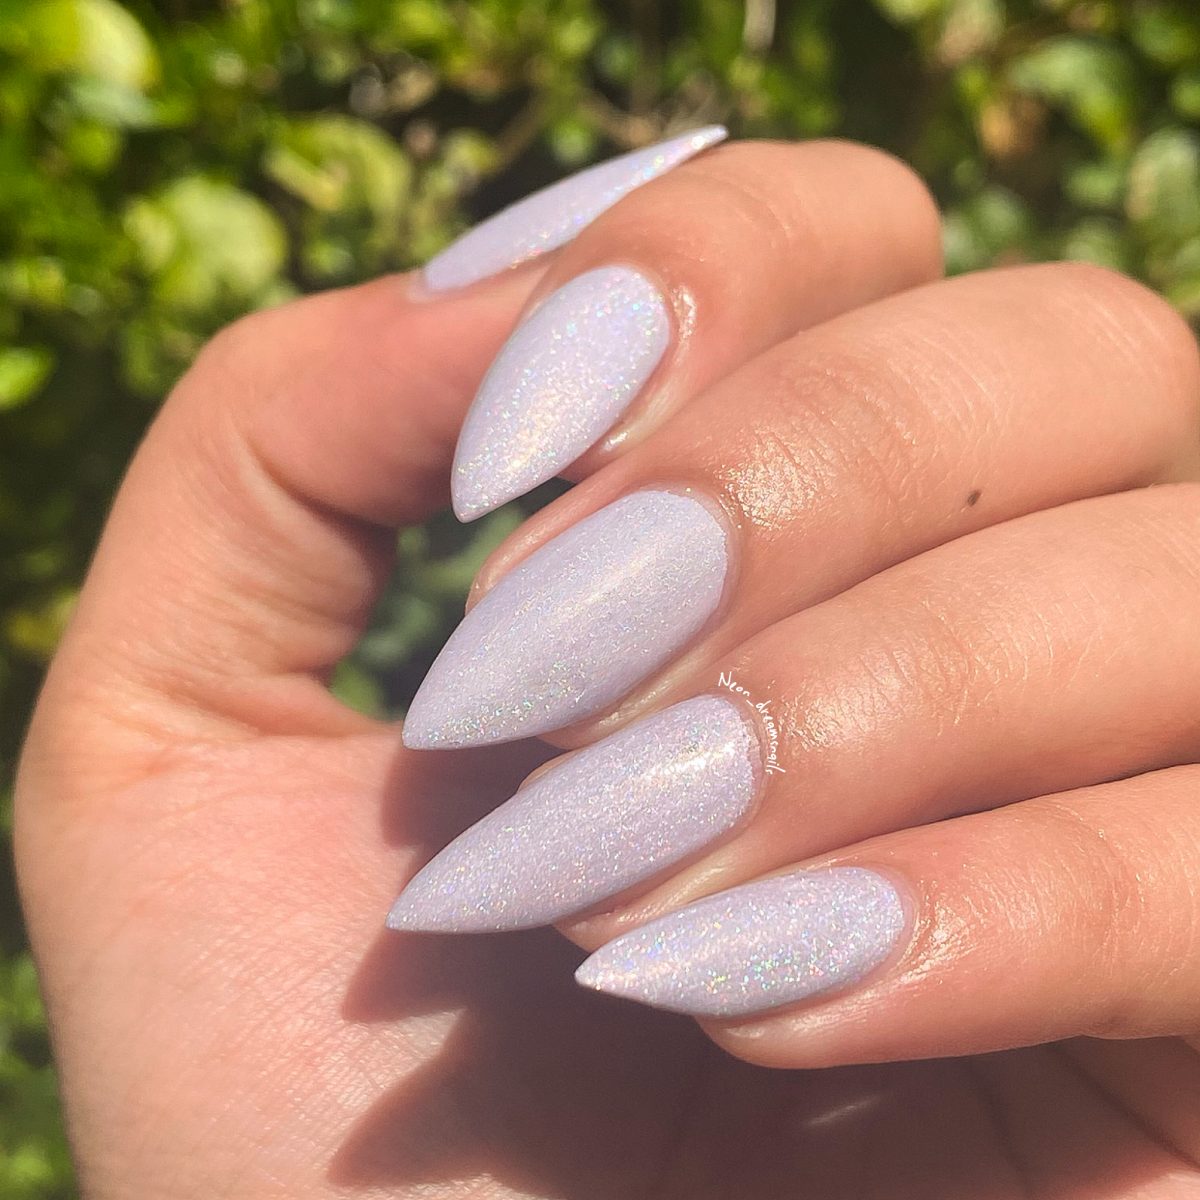 Save The Date - Soft Lavender Holographic Nail Polish by ILNP